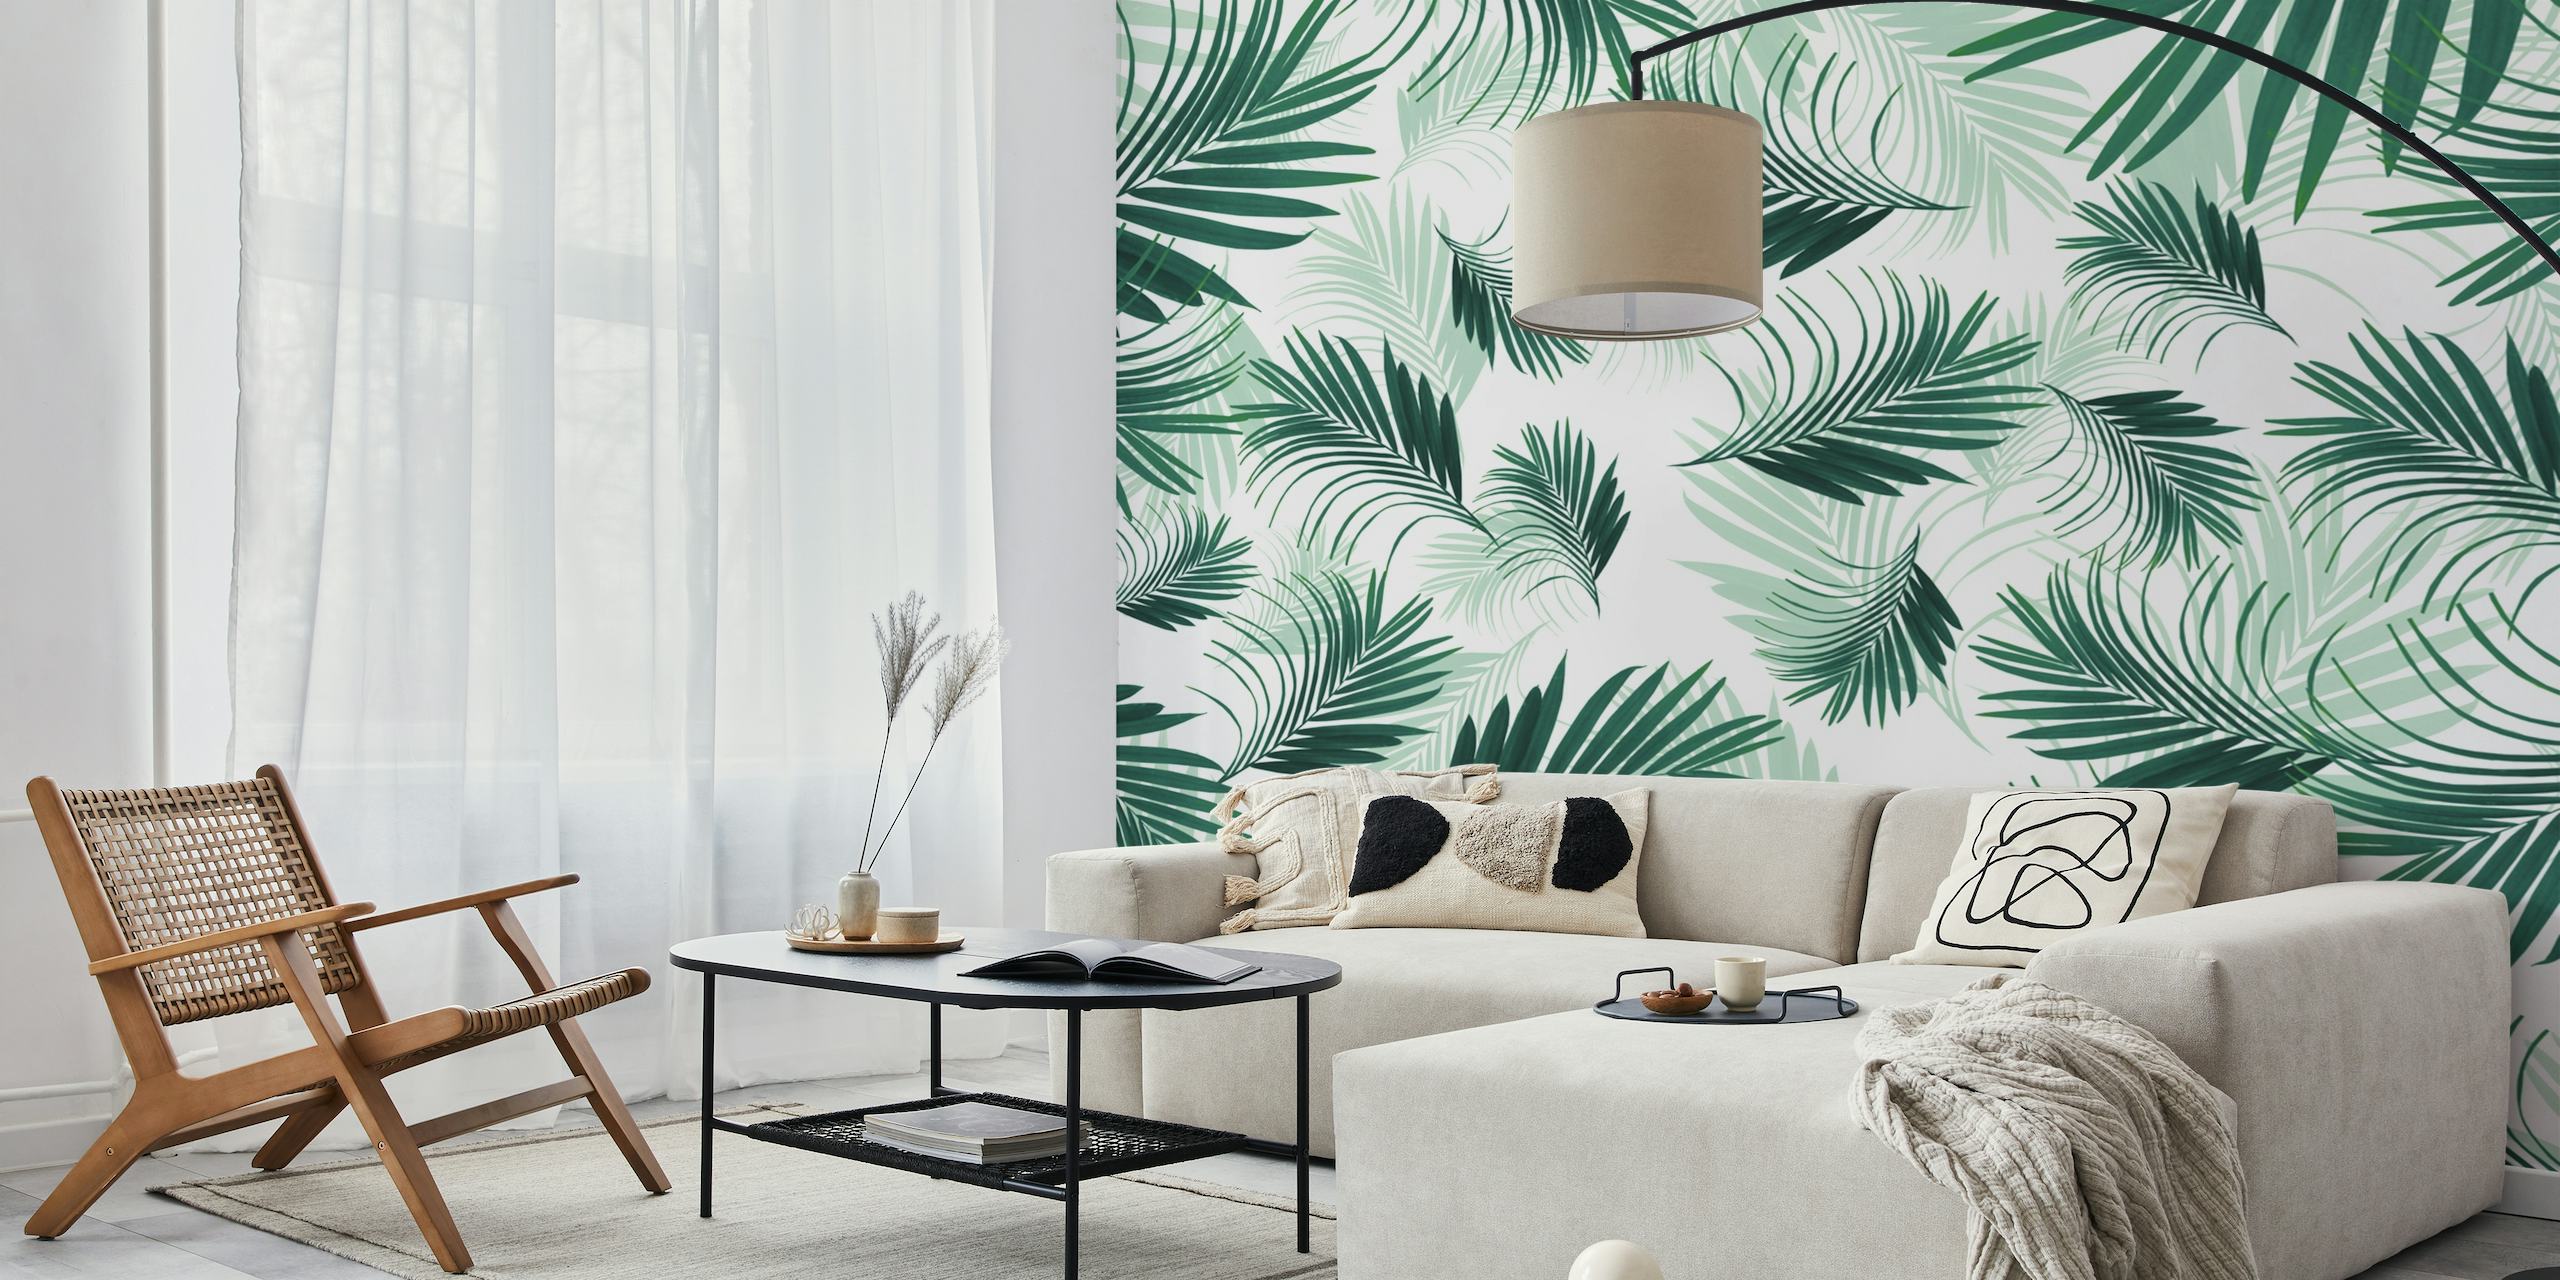 Vibrant Tropical Green Palms Wall Mural for a Nature-inspired Decor